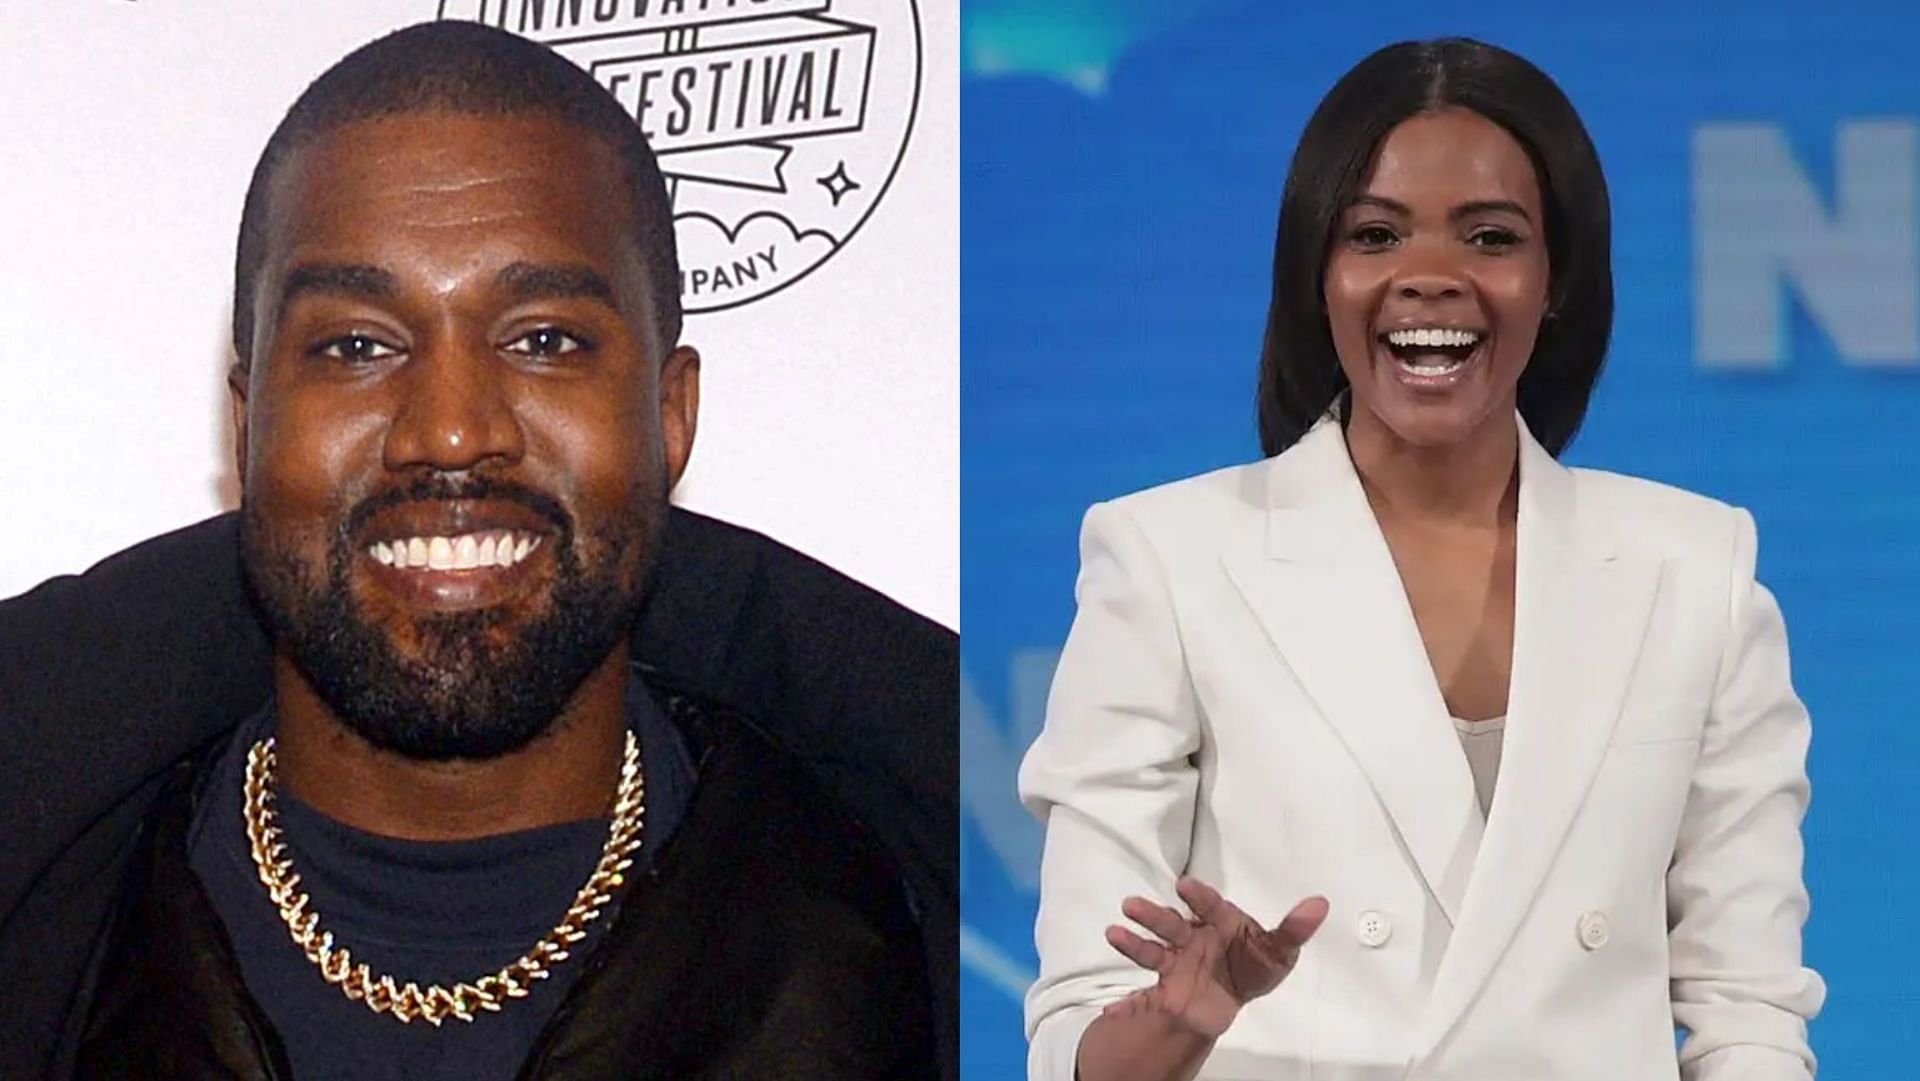 Candace Owens has fiercely supported Kanye West throughout his controversial antics on social media. (Image via Brad Barket/Getty, Scott Olson/Getty)